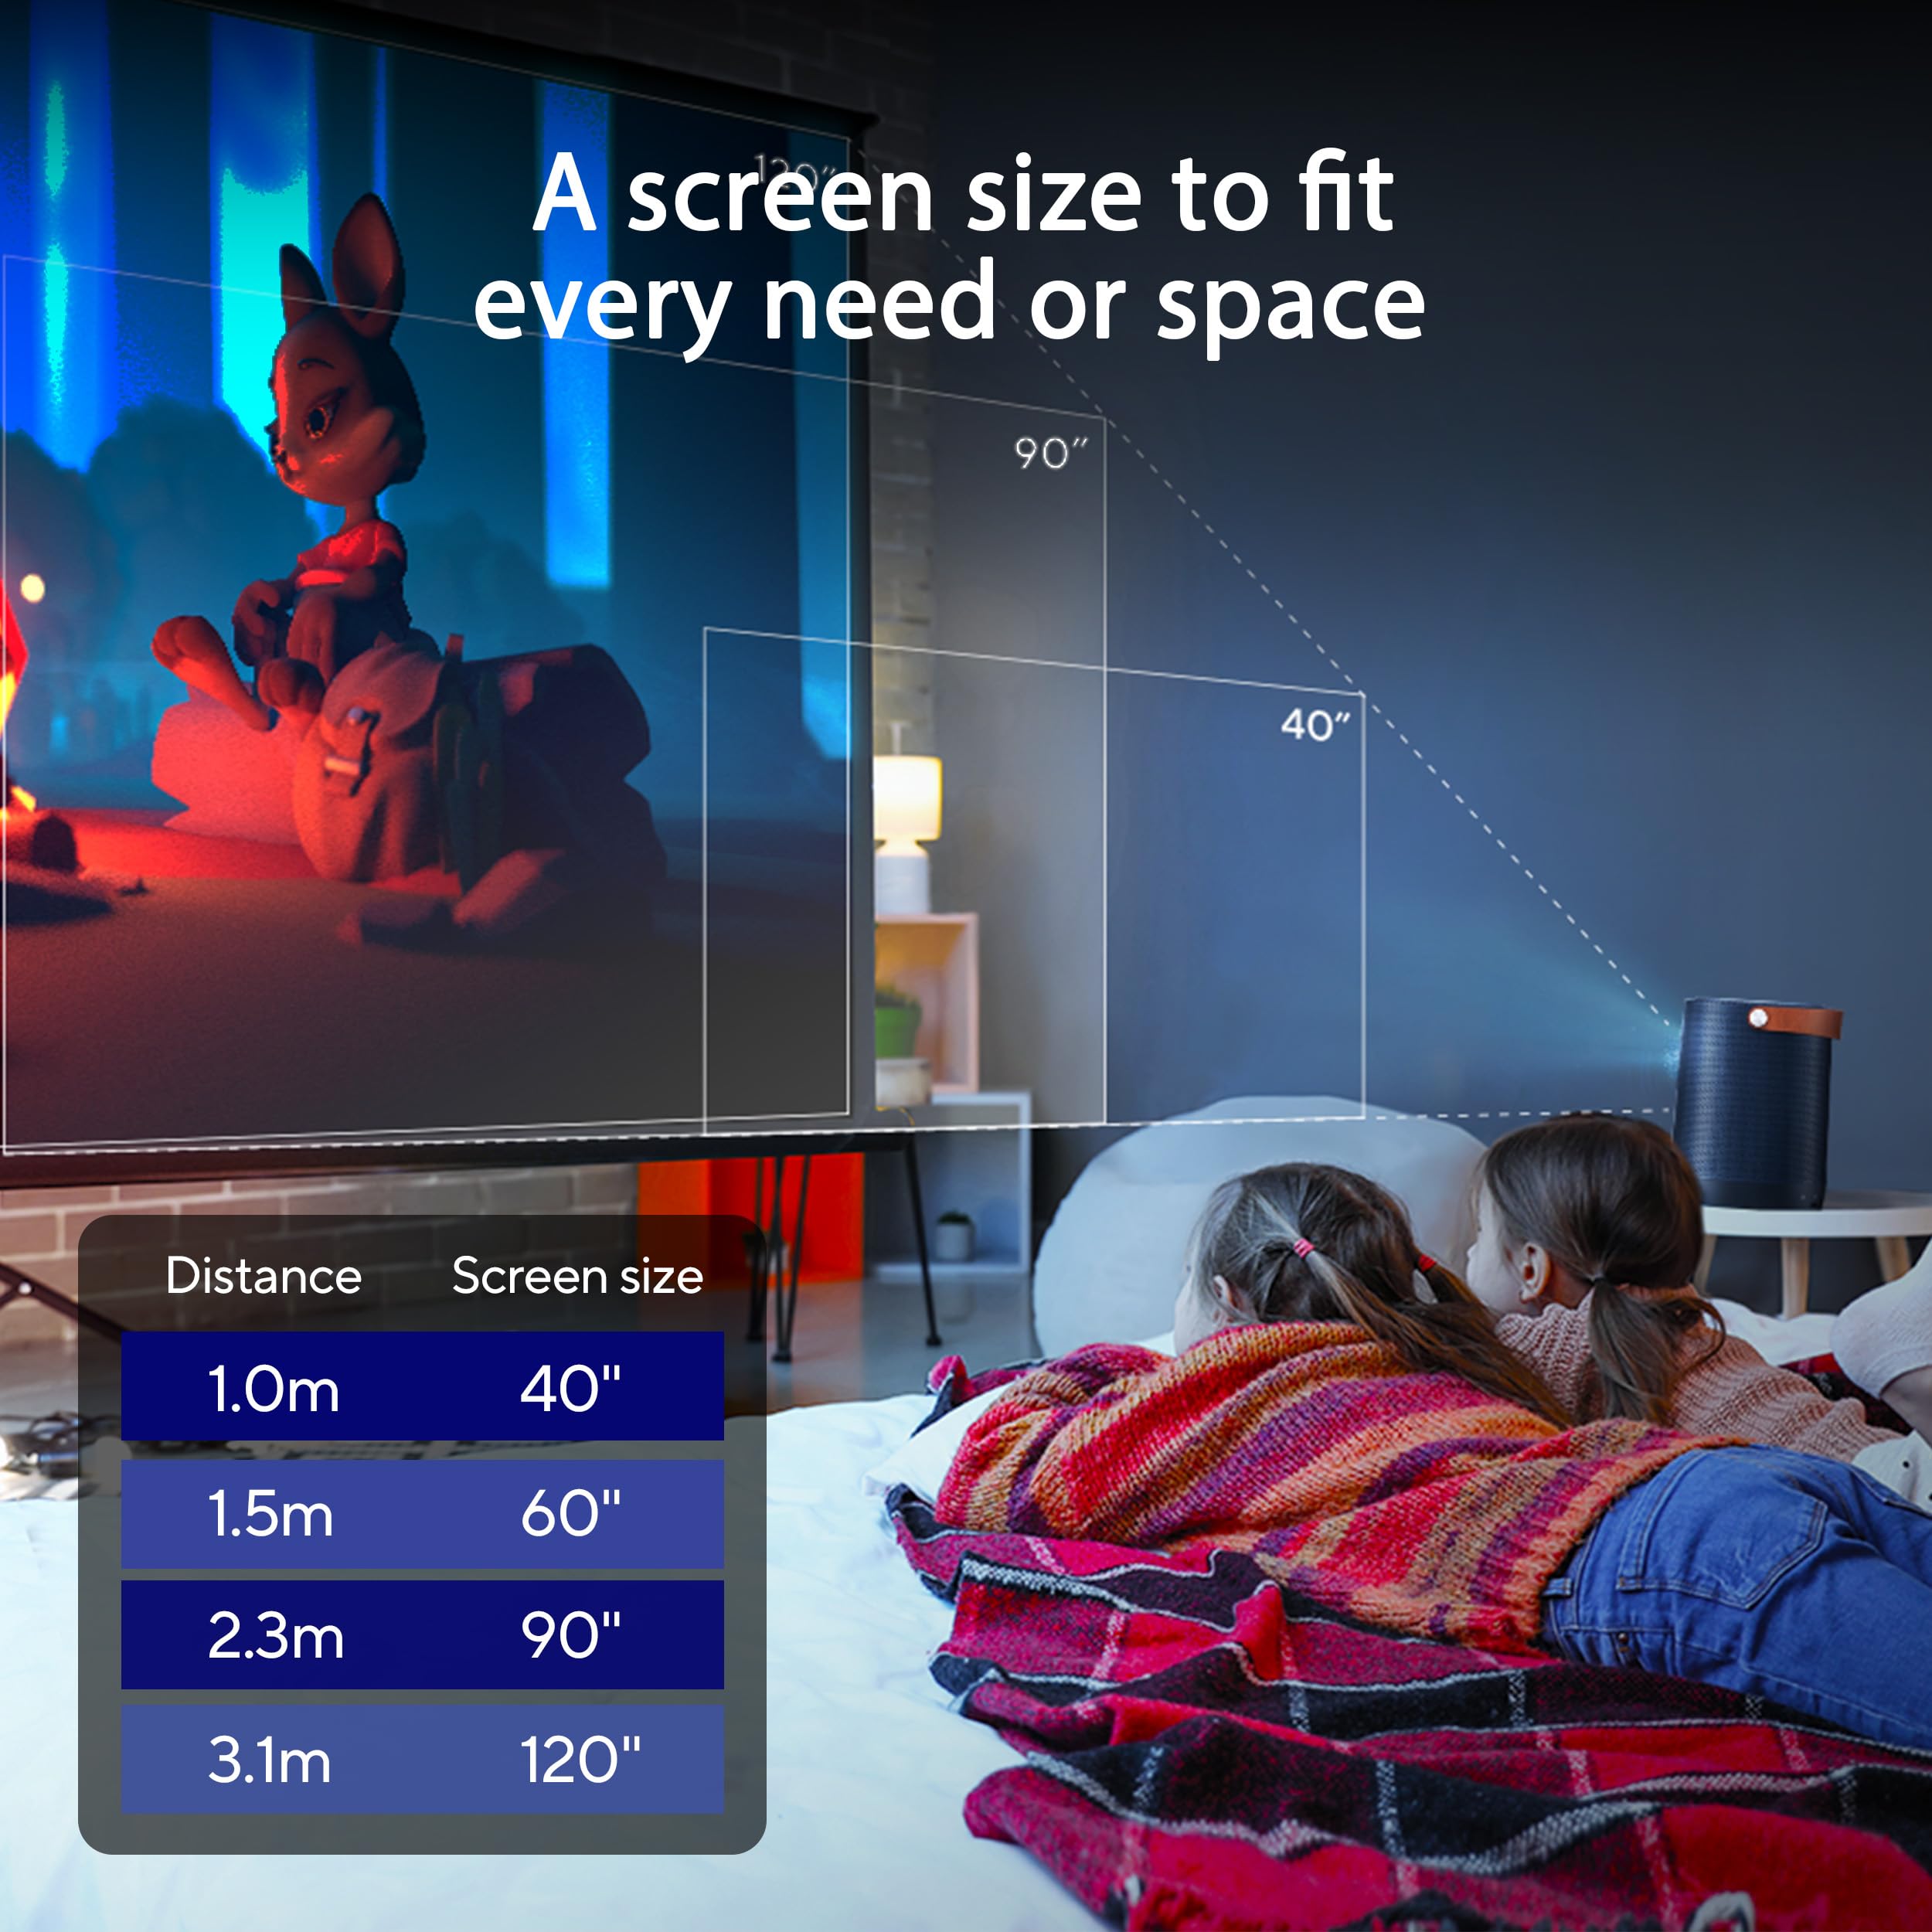 ASUS ZenBeam L2 Smart Portable LED Projector - 960 LED Lumens, 1080P, Chromecast, 10W Bluetooth Speaker, Built-in battery, 3.5 hour Video Playback, Wireless Projection, ASUS Light Wall, Android TV Box